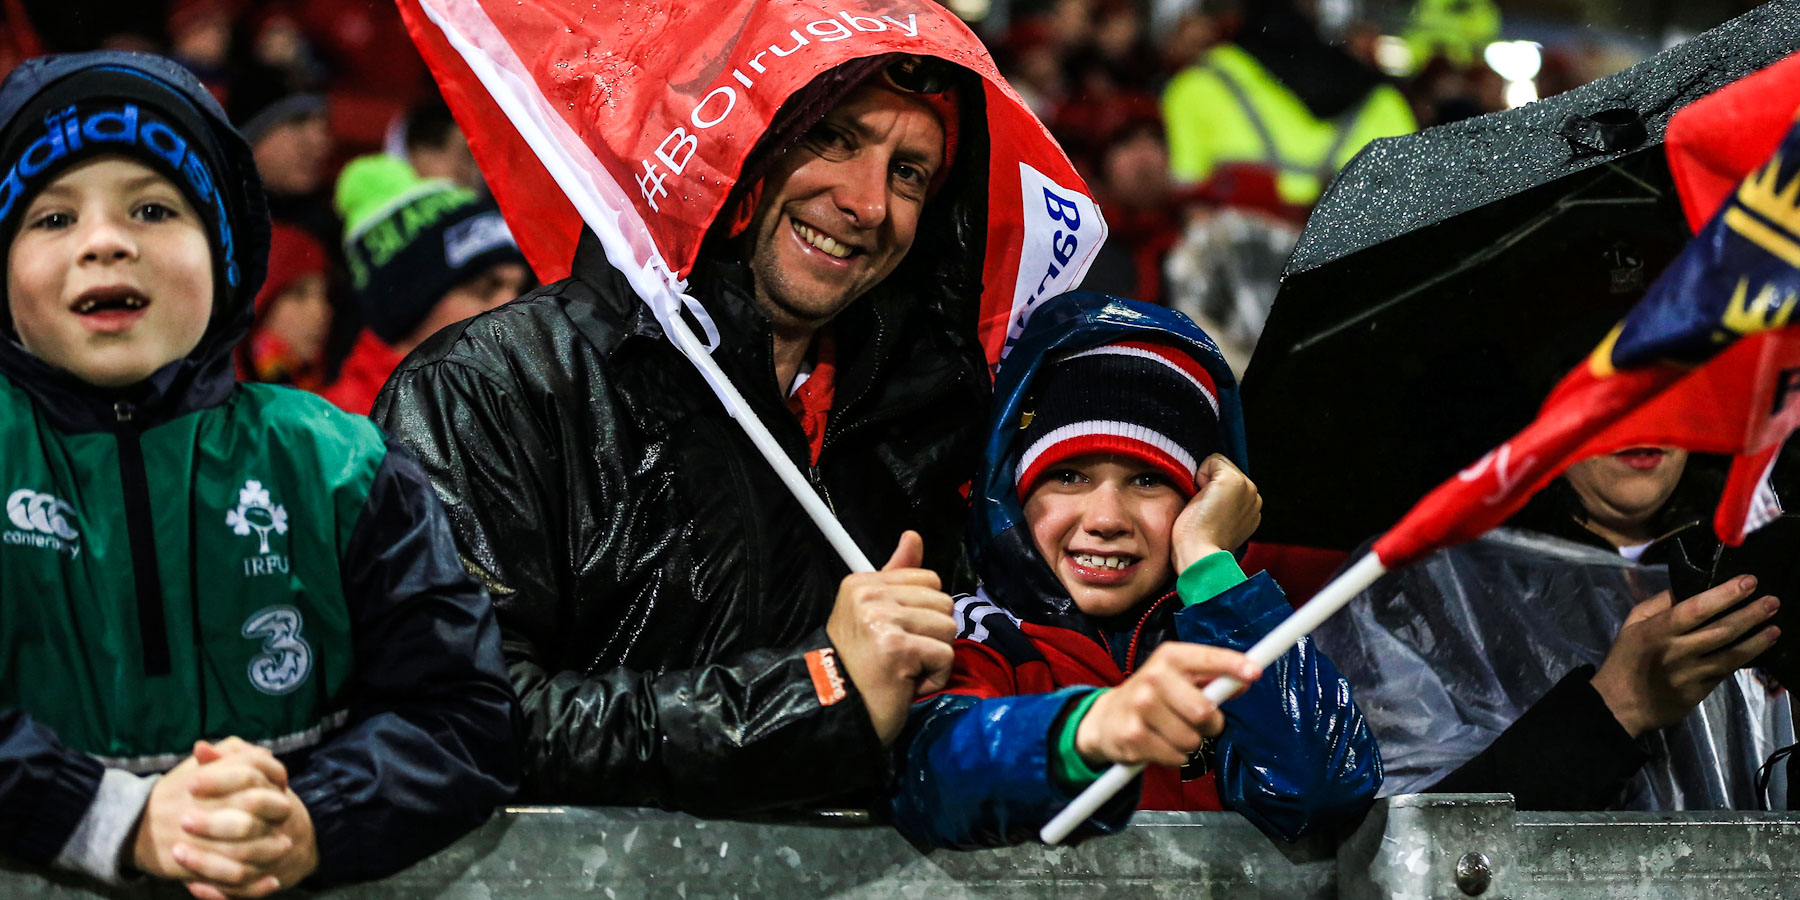 Munster supporters braving the elements in Limerick.